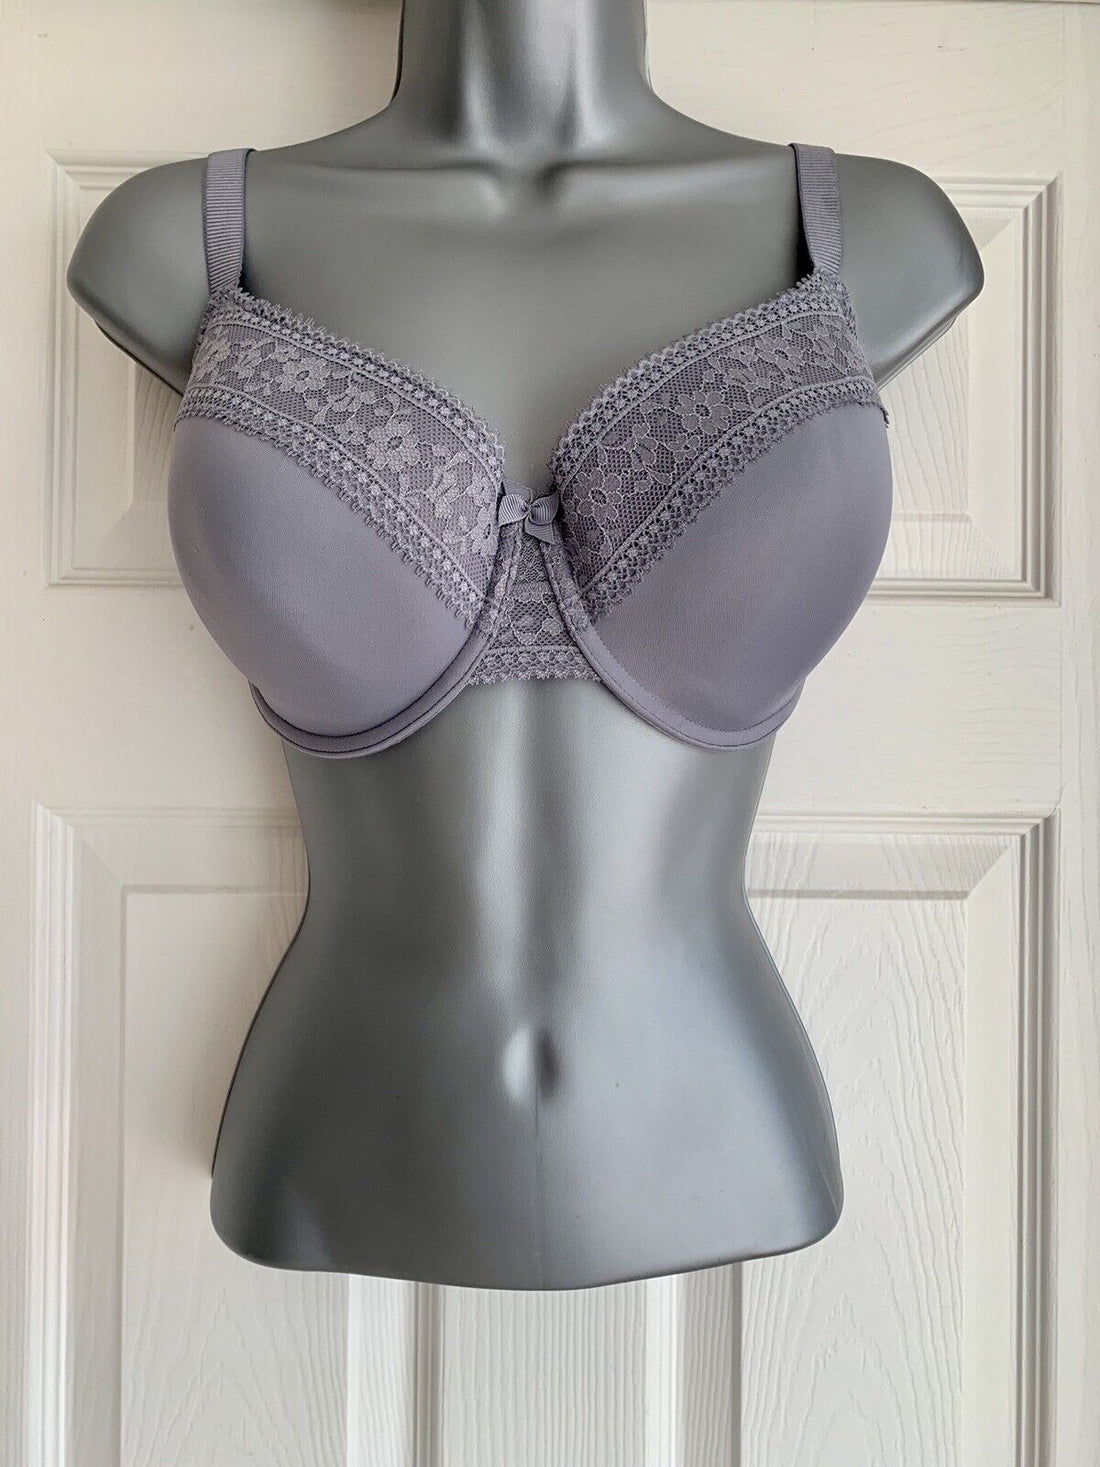 M&S UNDERWIRED Non Padded FULL CUP BRA with LACE TRIMS in GREY MIX Size 42B